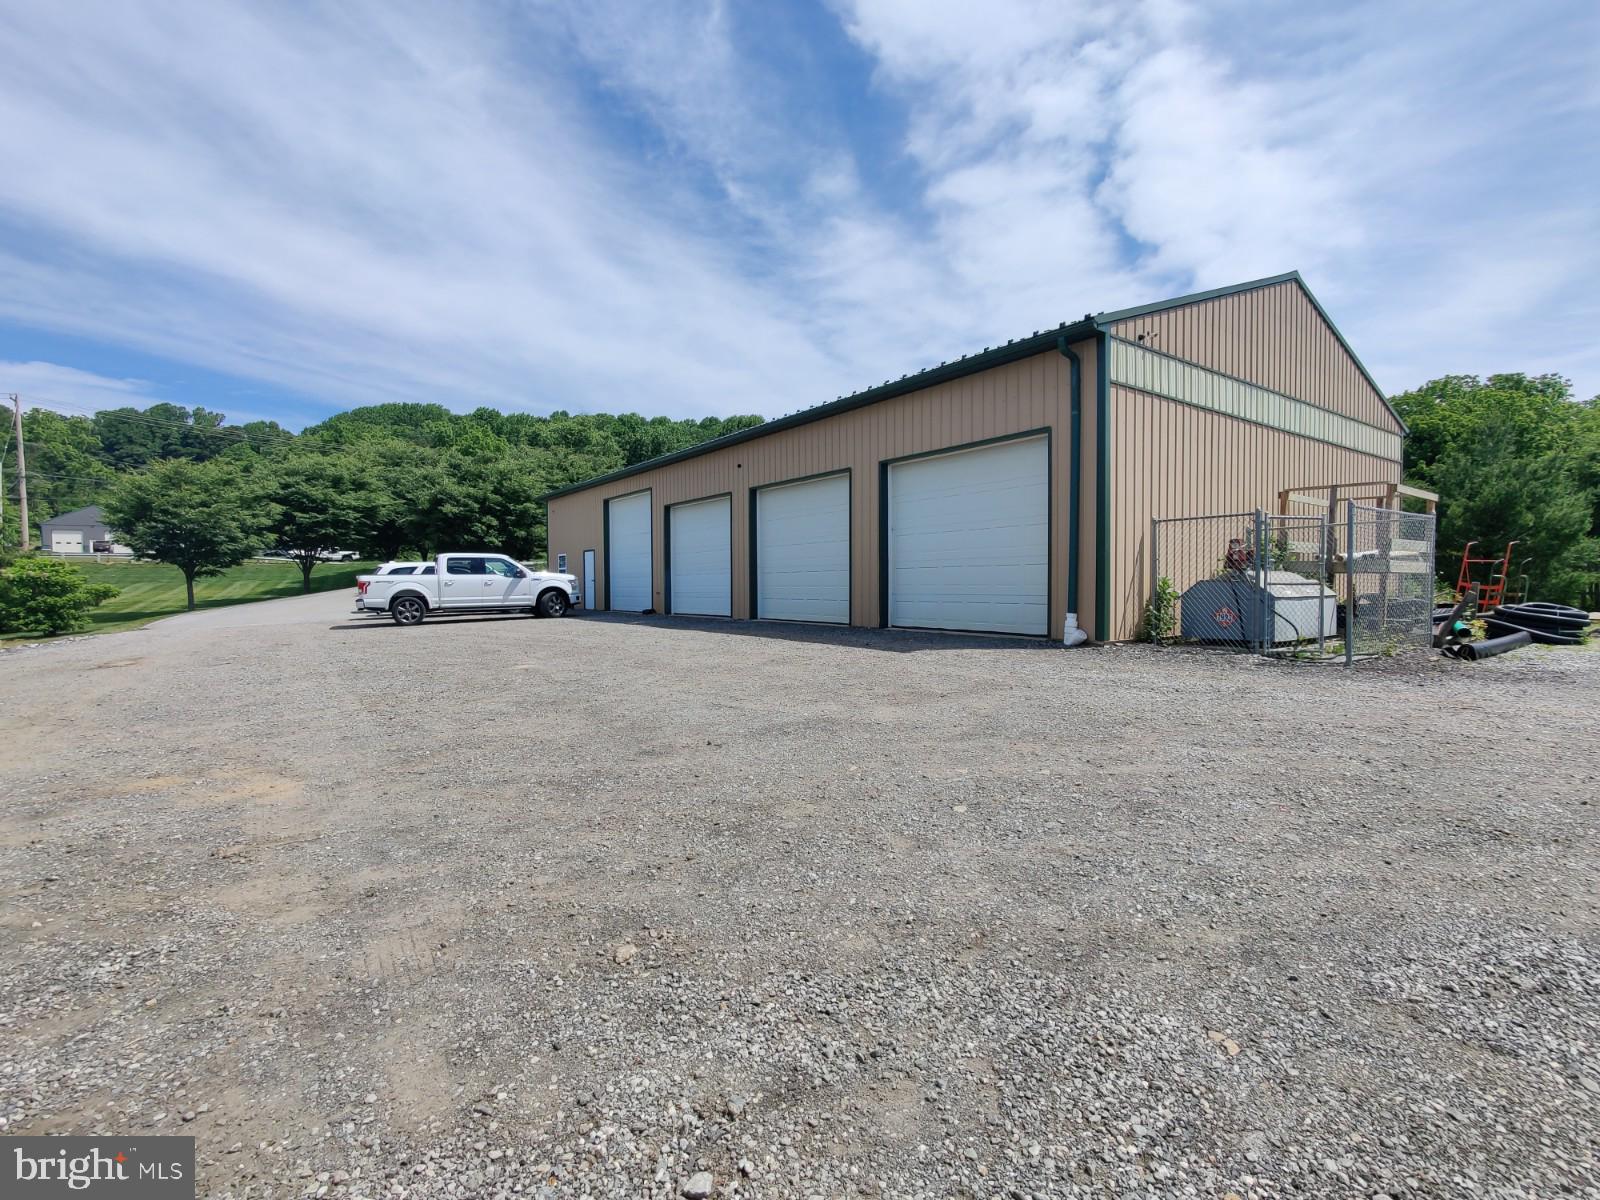 40 x 80 steel building on 1.3 acre commercial type zoning. 4 bays with overhead doors (1-12x12 &  3-10x12) 
Has cement floors throughout as well as electricity & water.  Large office area has 3 - 12x15 offices and AOA compliant bathroom.  1 - bathroom in shop area for employee use. Property has onsite water & septic. Diesel fuel tank has concrete floor base and is fenced in.  Alternative septic field exists. Presently used as a landscaping business shop.